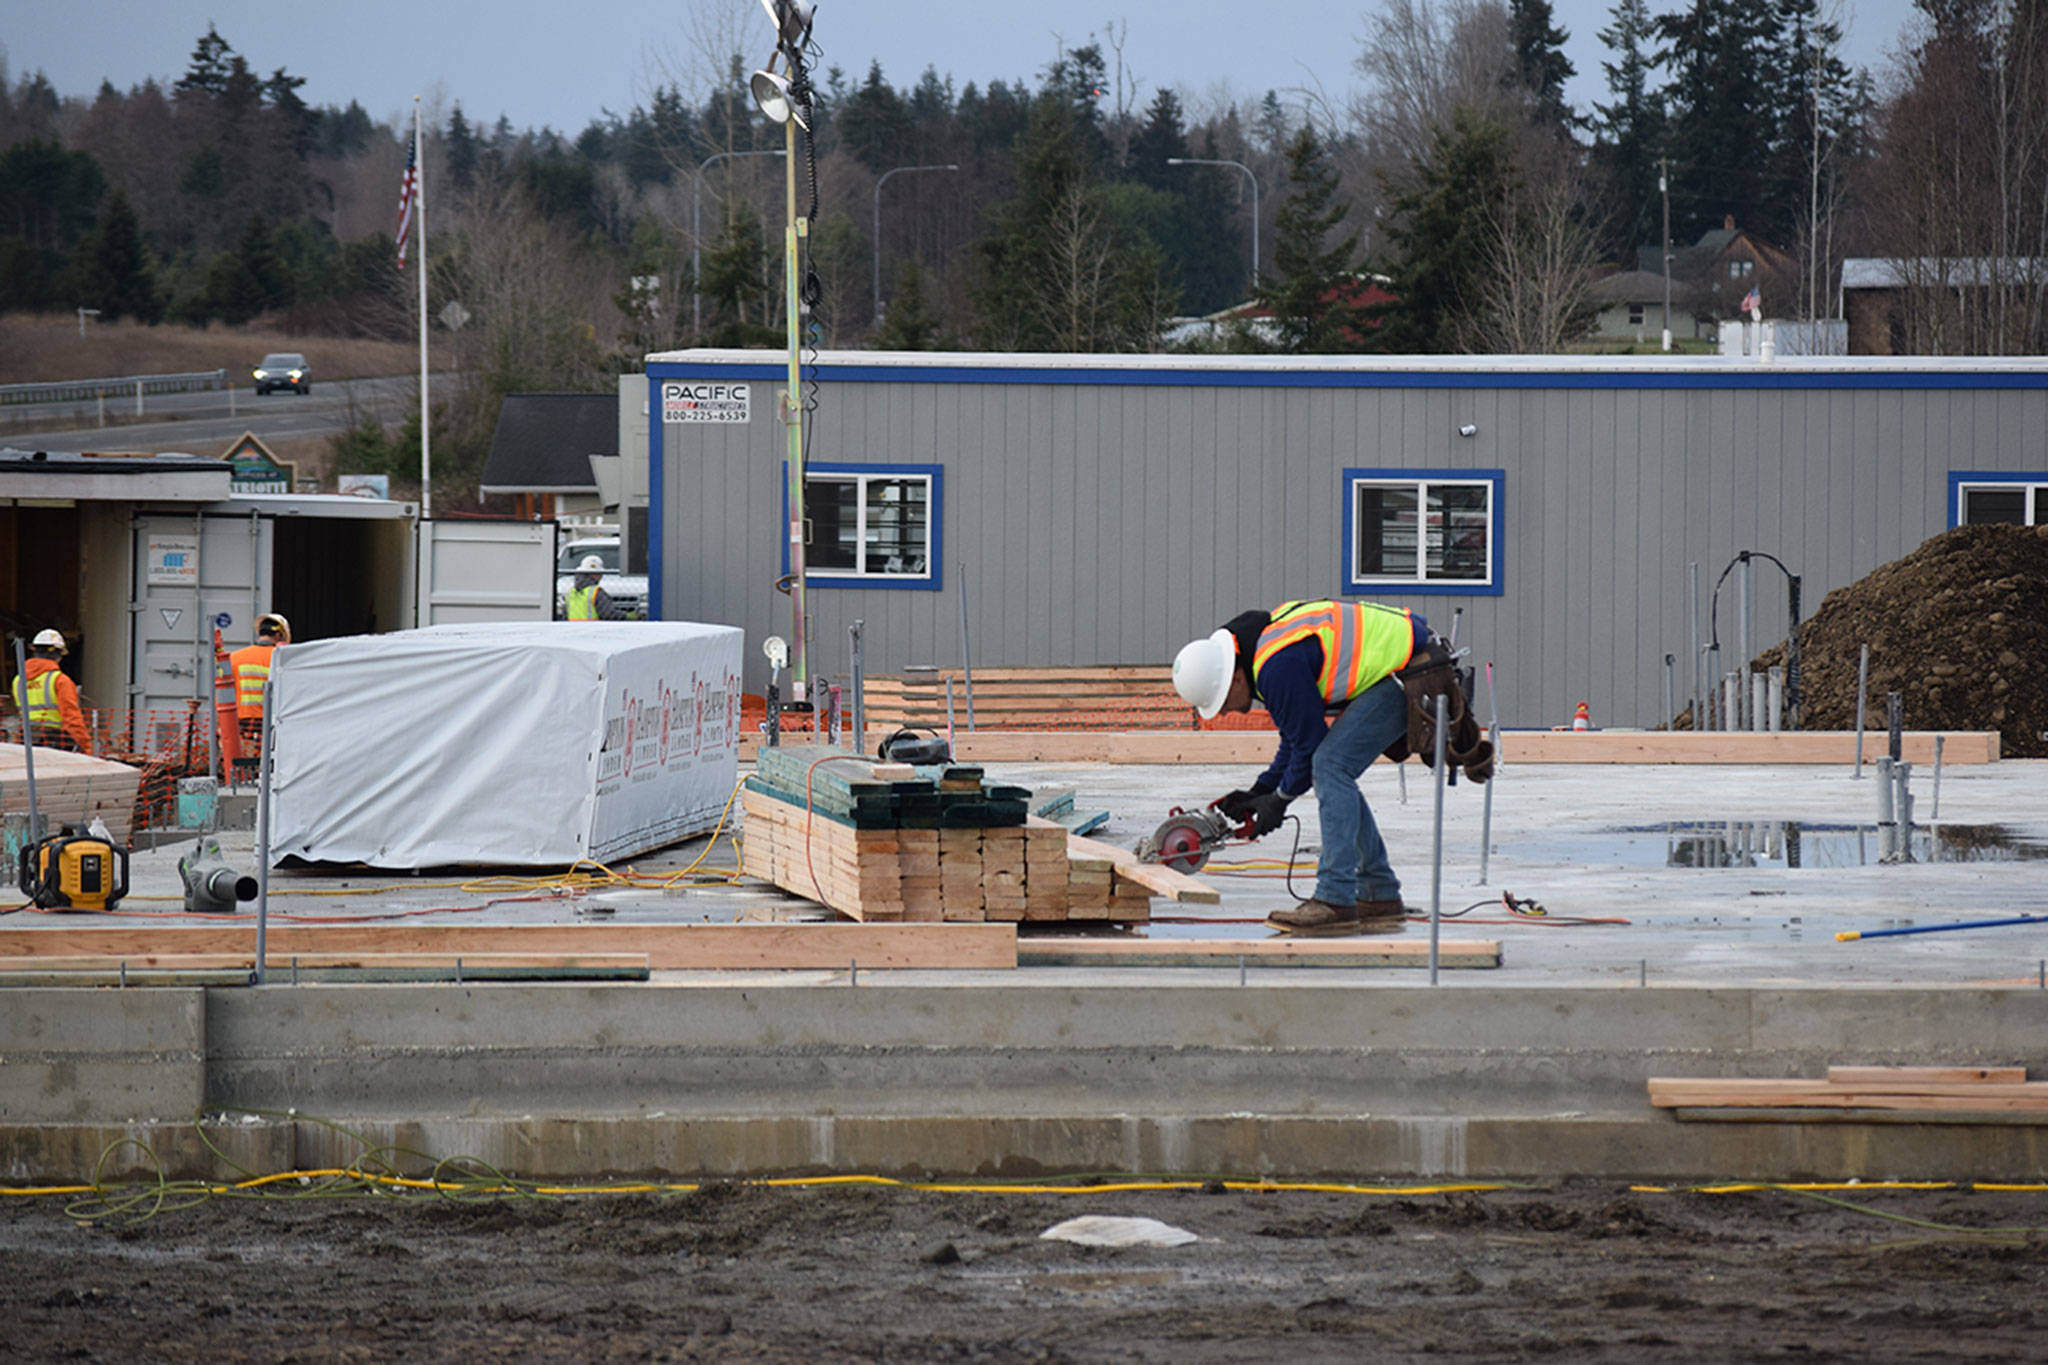 Construction crews continue to build an Arco gas station and 3,100 square foot ampm store on Carlsborg Road and U.S. Highway 101. Sequim Gazette file photo by Erin Hawkins